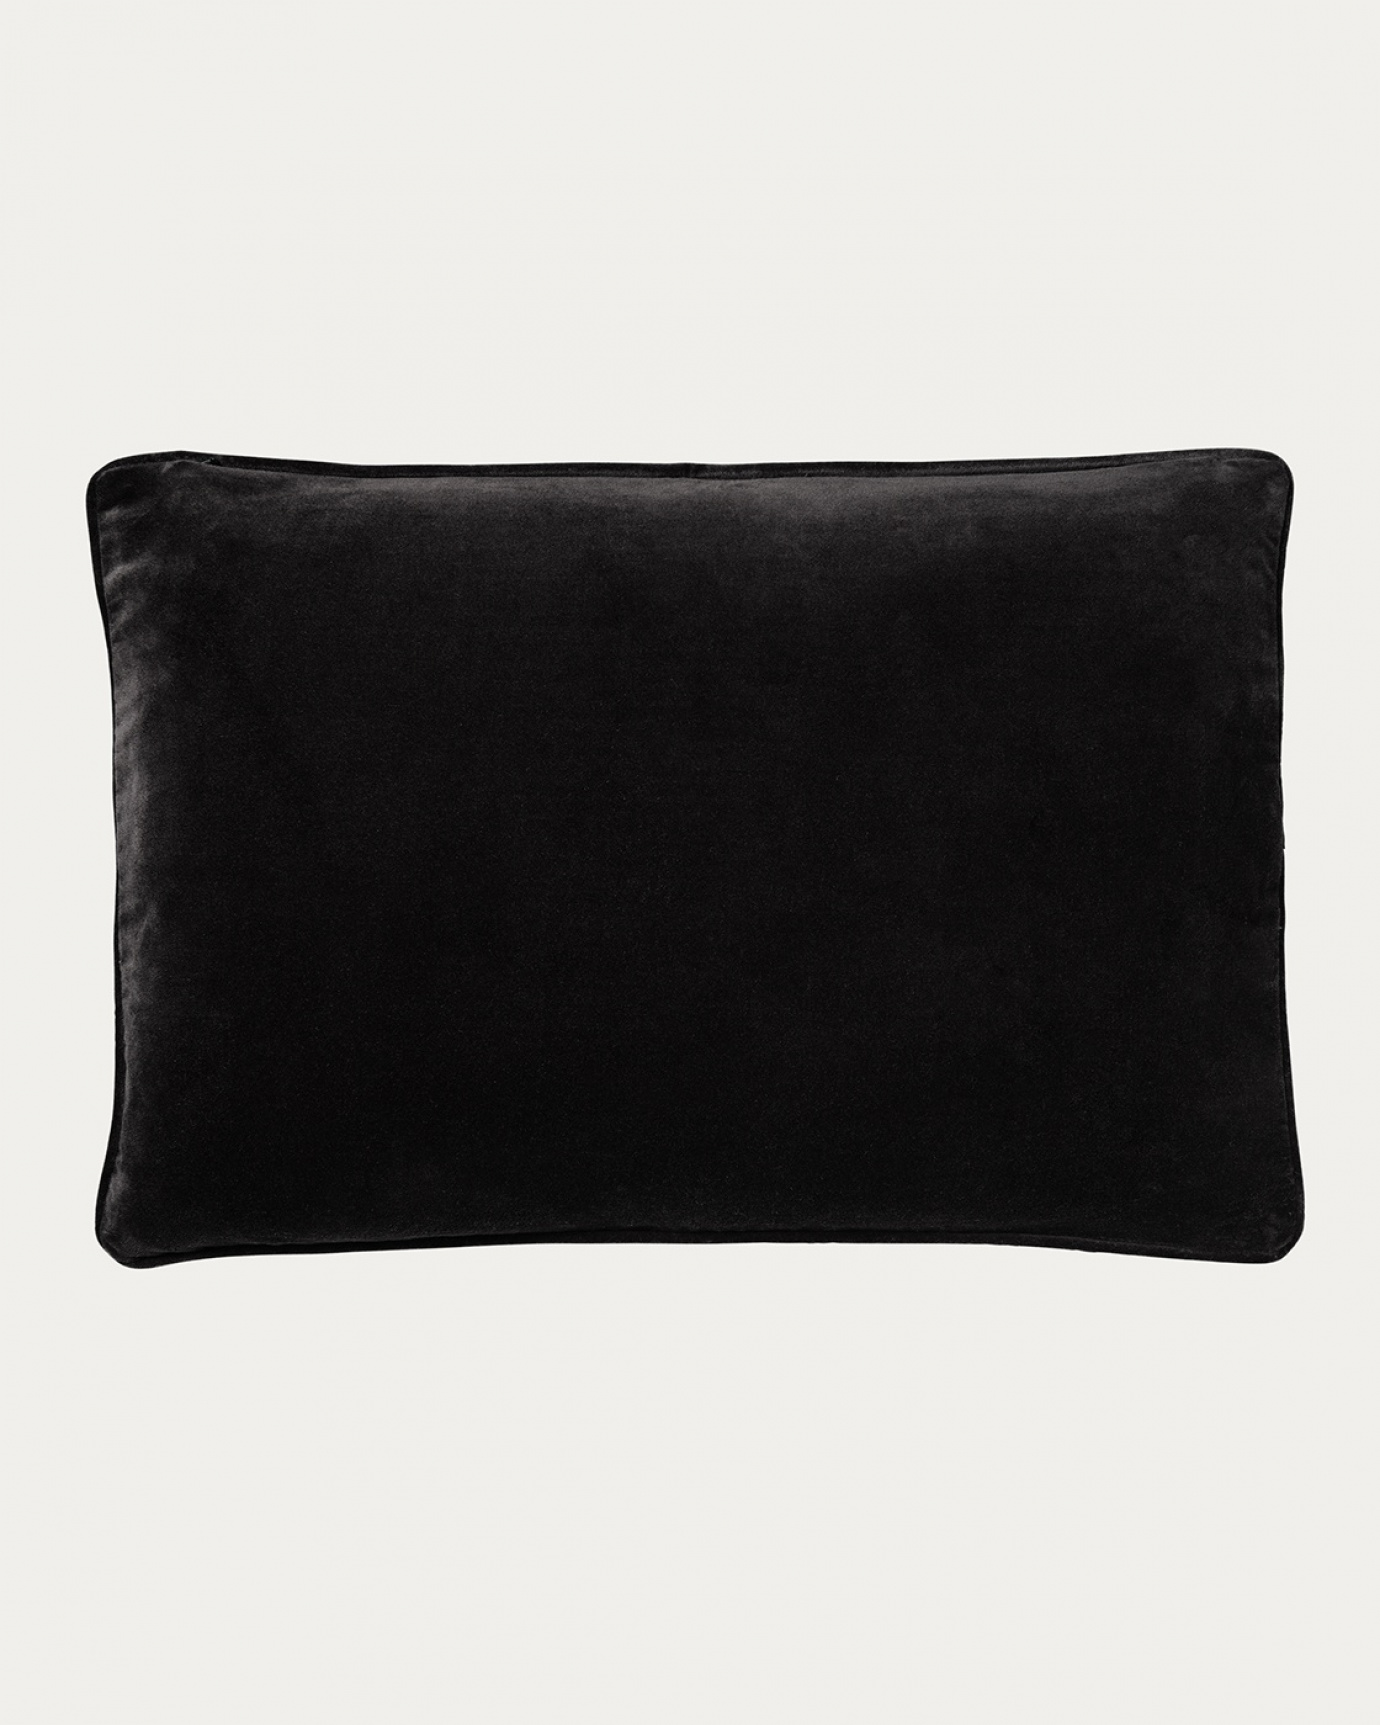 Product image black PAOLO cushion cover in soft organic cotton velvet from LINUM DESIGN. Size 40x60 cm.